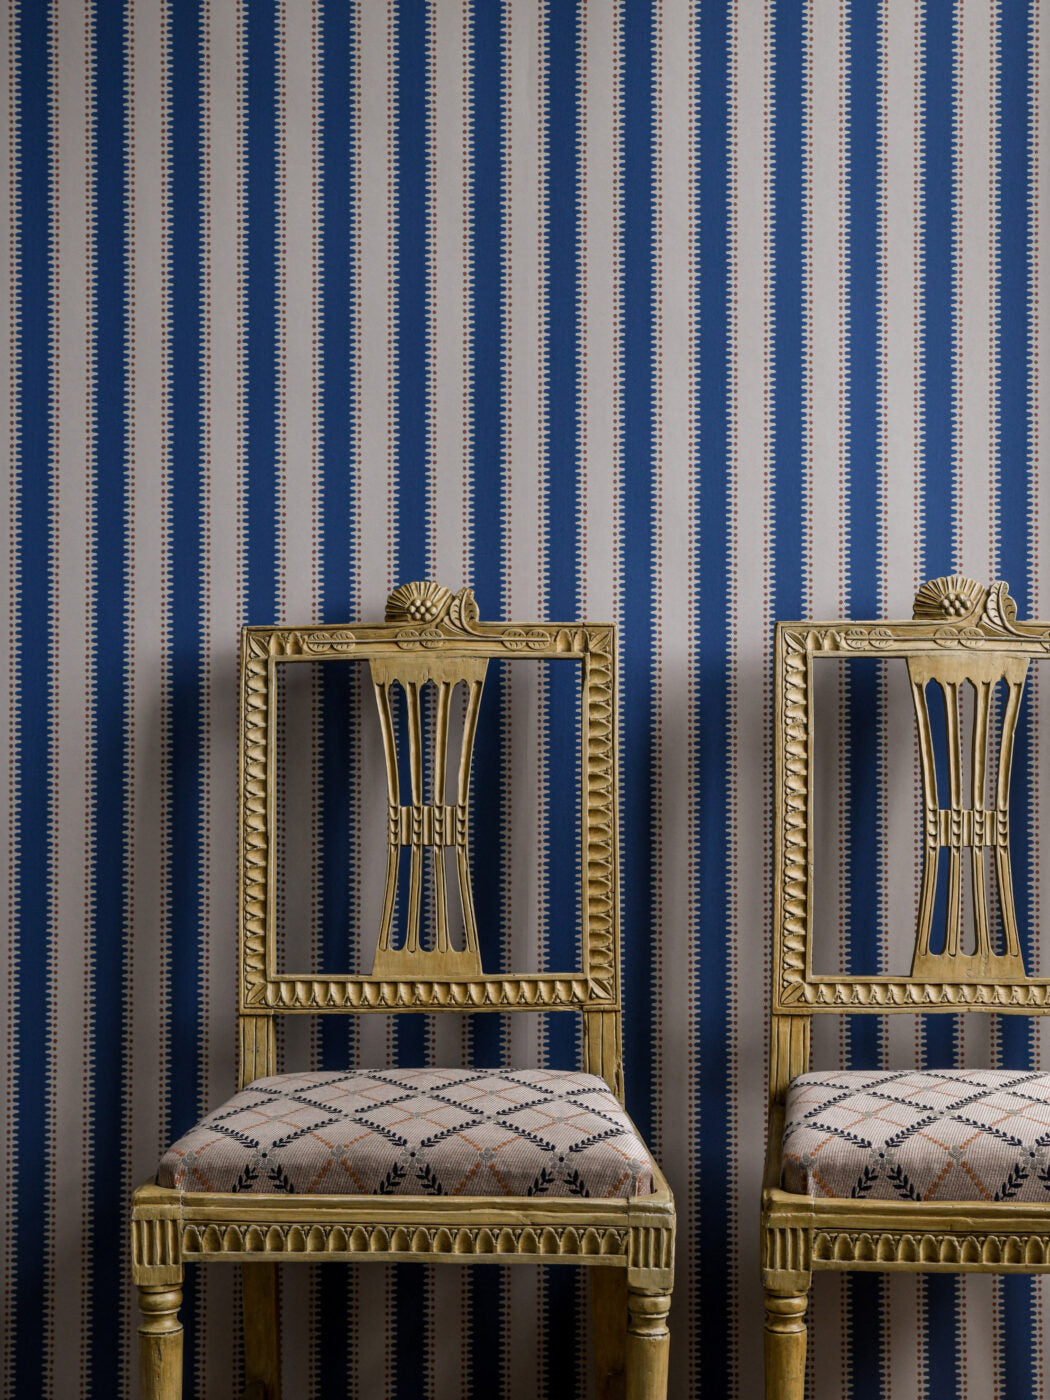 Make a stripe with jagged edges, add some dots and you’ll get a decorative, more playful striped wallpaper.